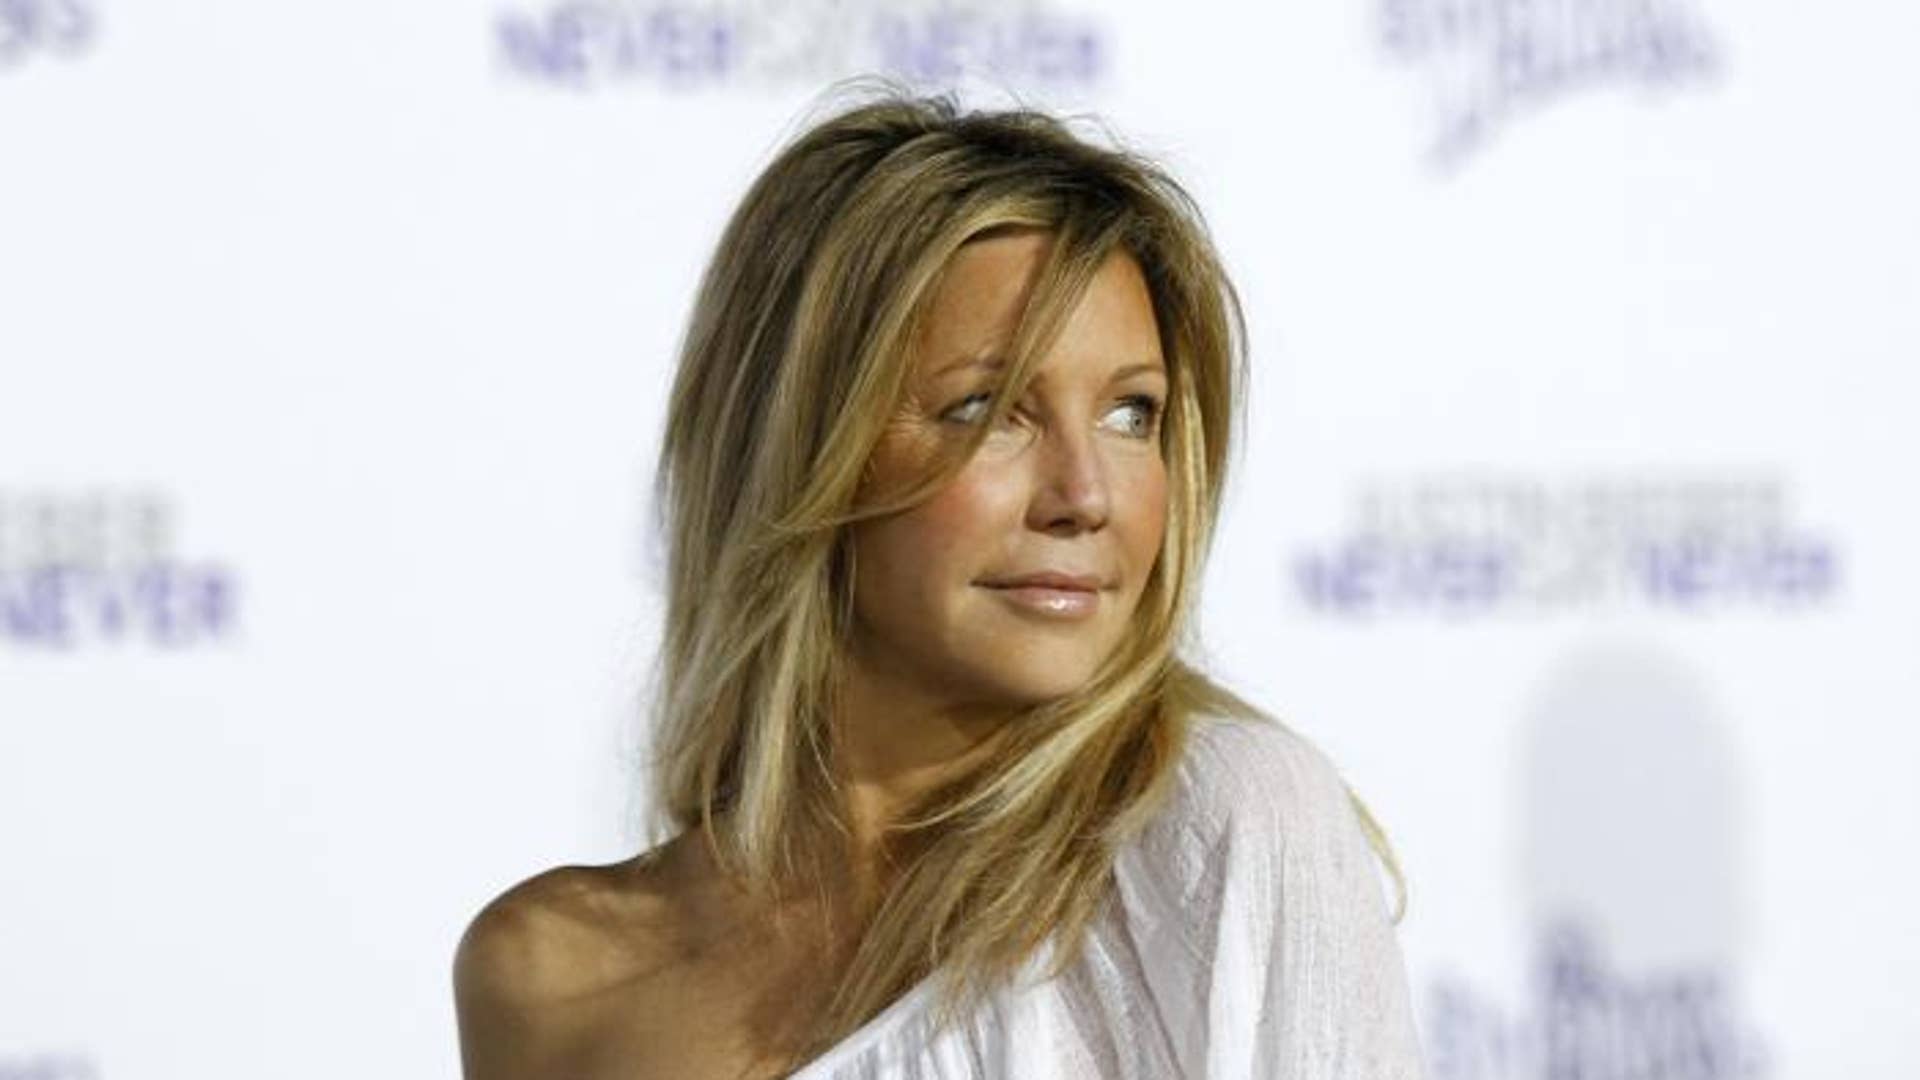 SS3373383) Movie picture of Heather Locklear buy celebrity photos and  posters at Starstills.com